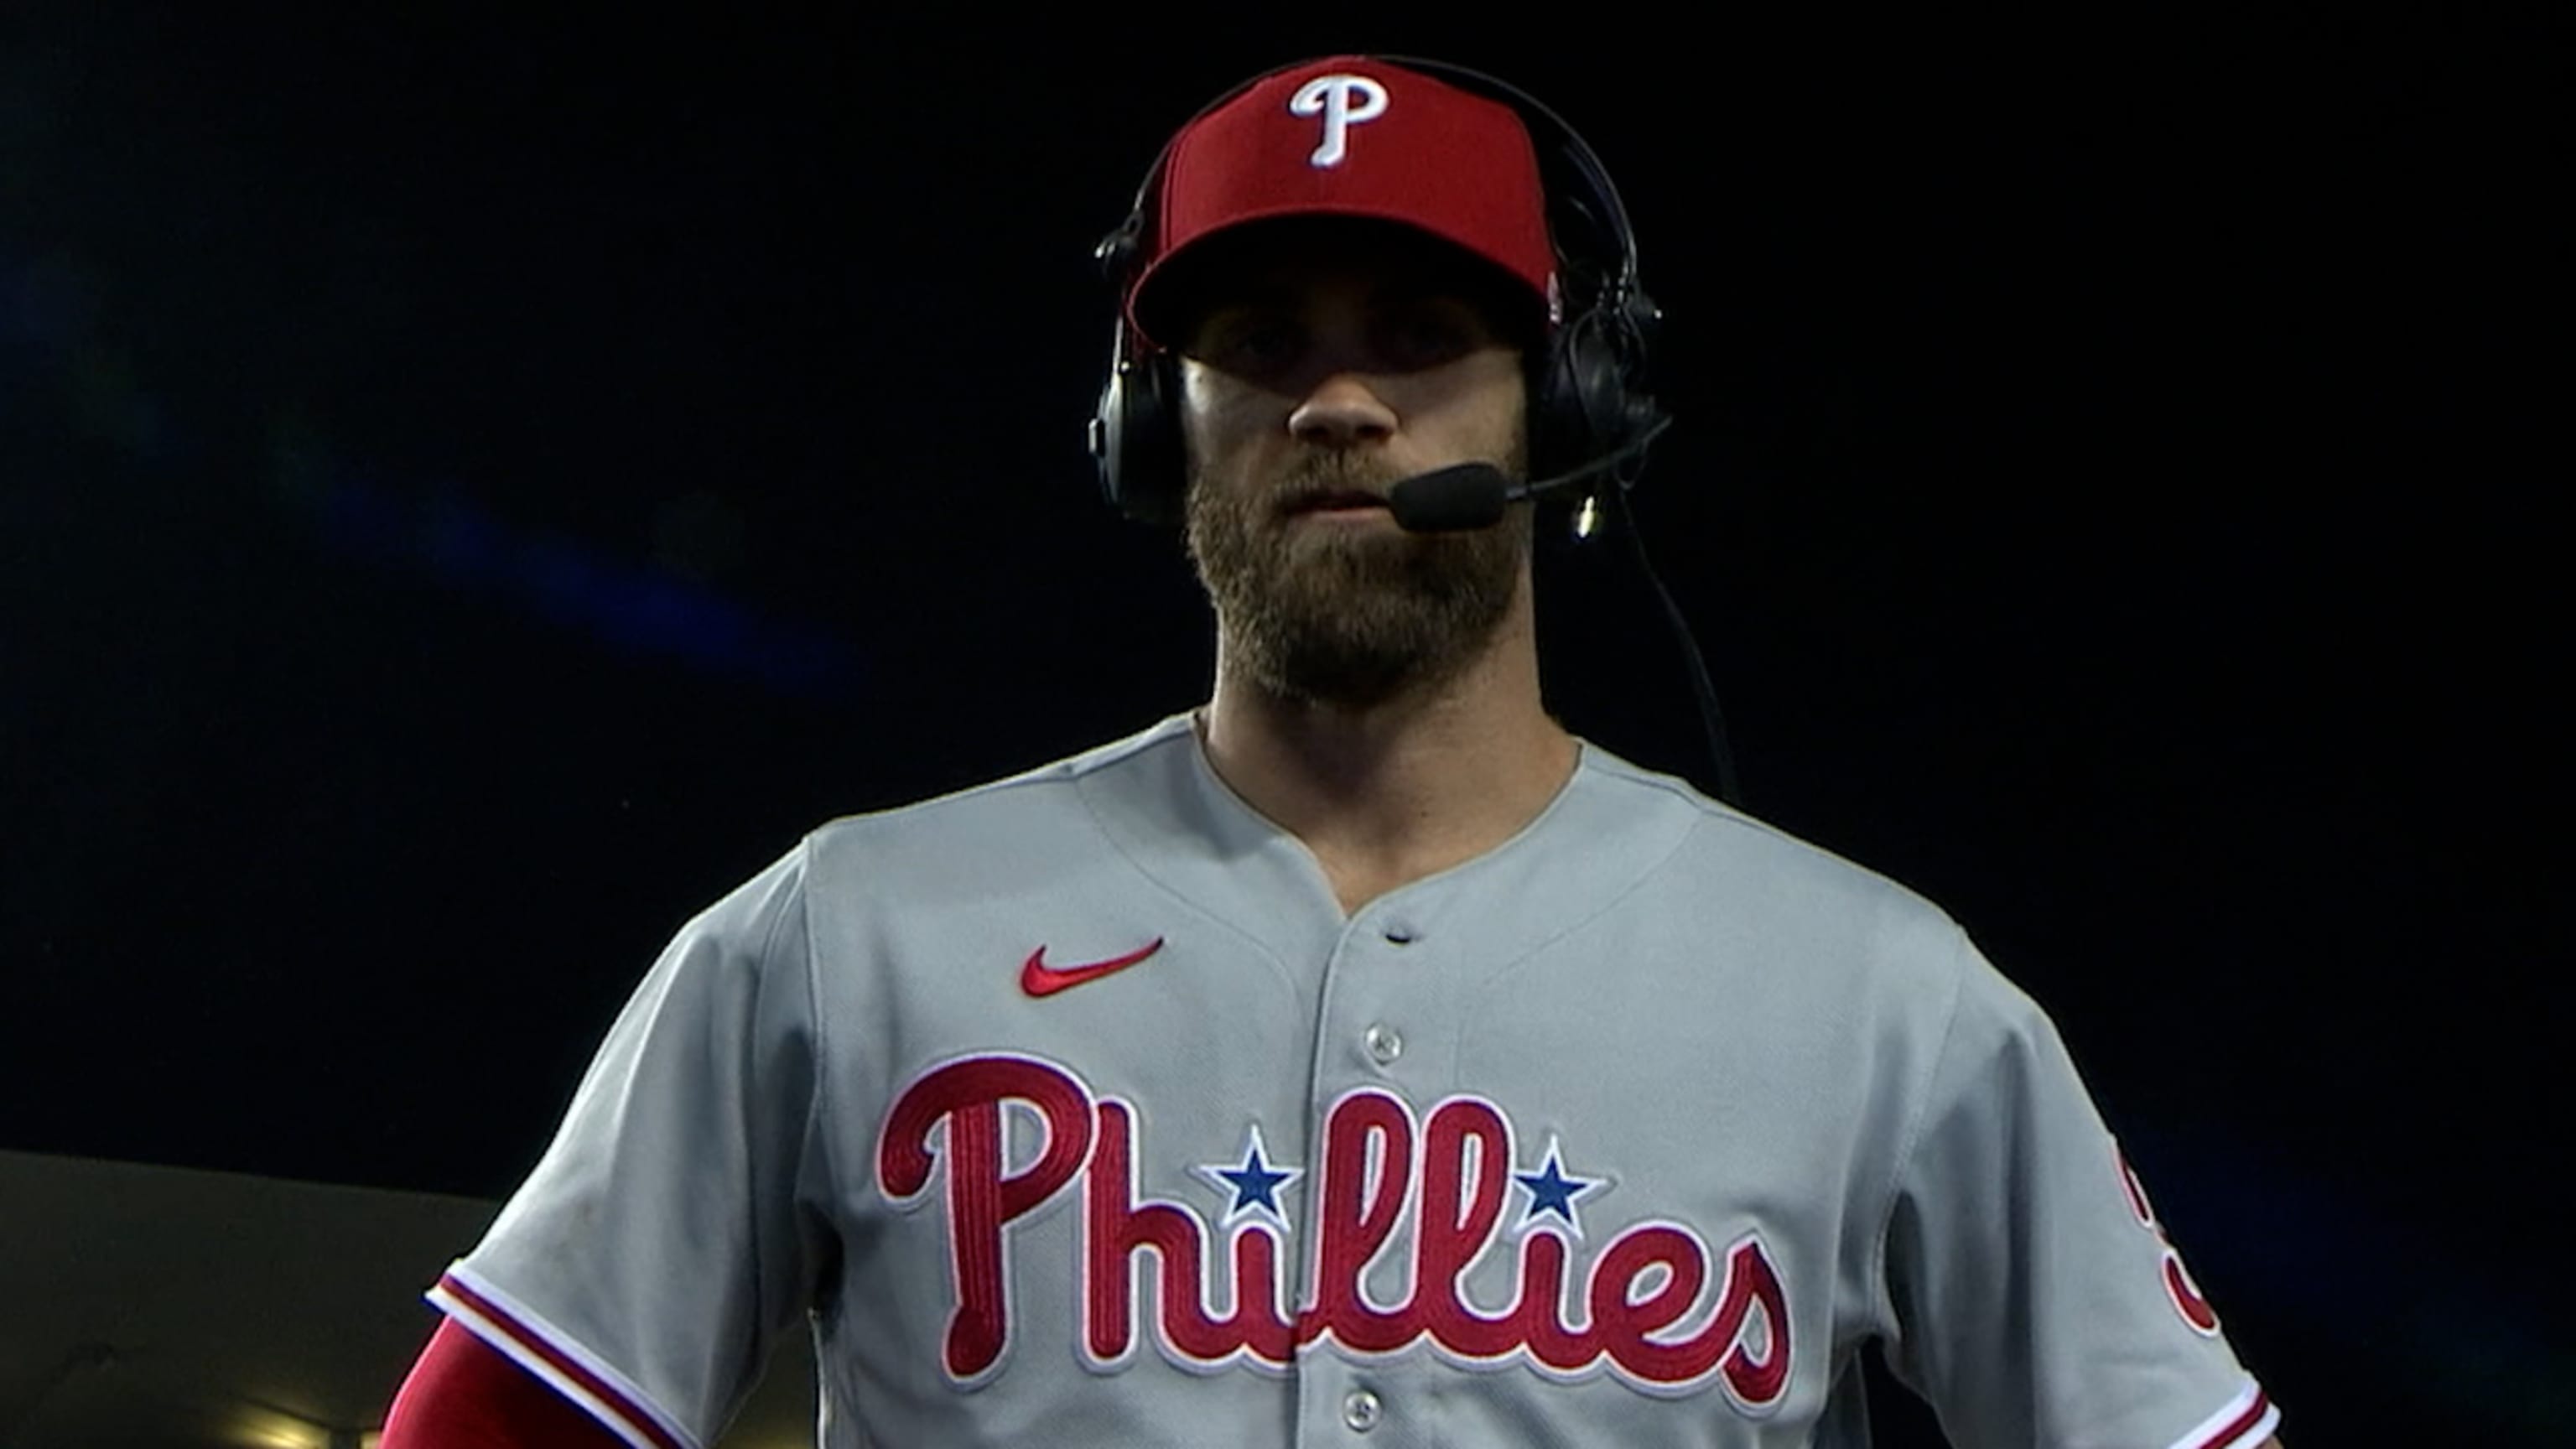 Bryce Harper suffers elbow injury, not UCL related